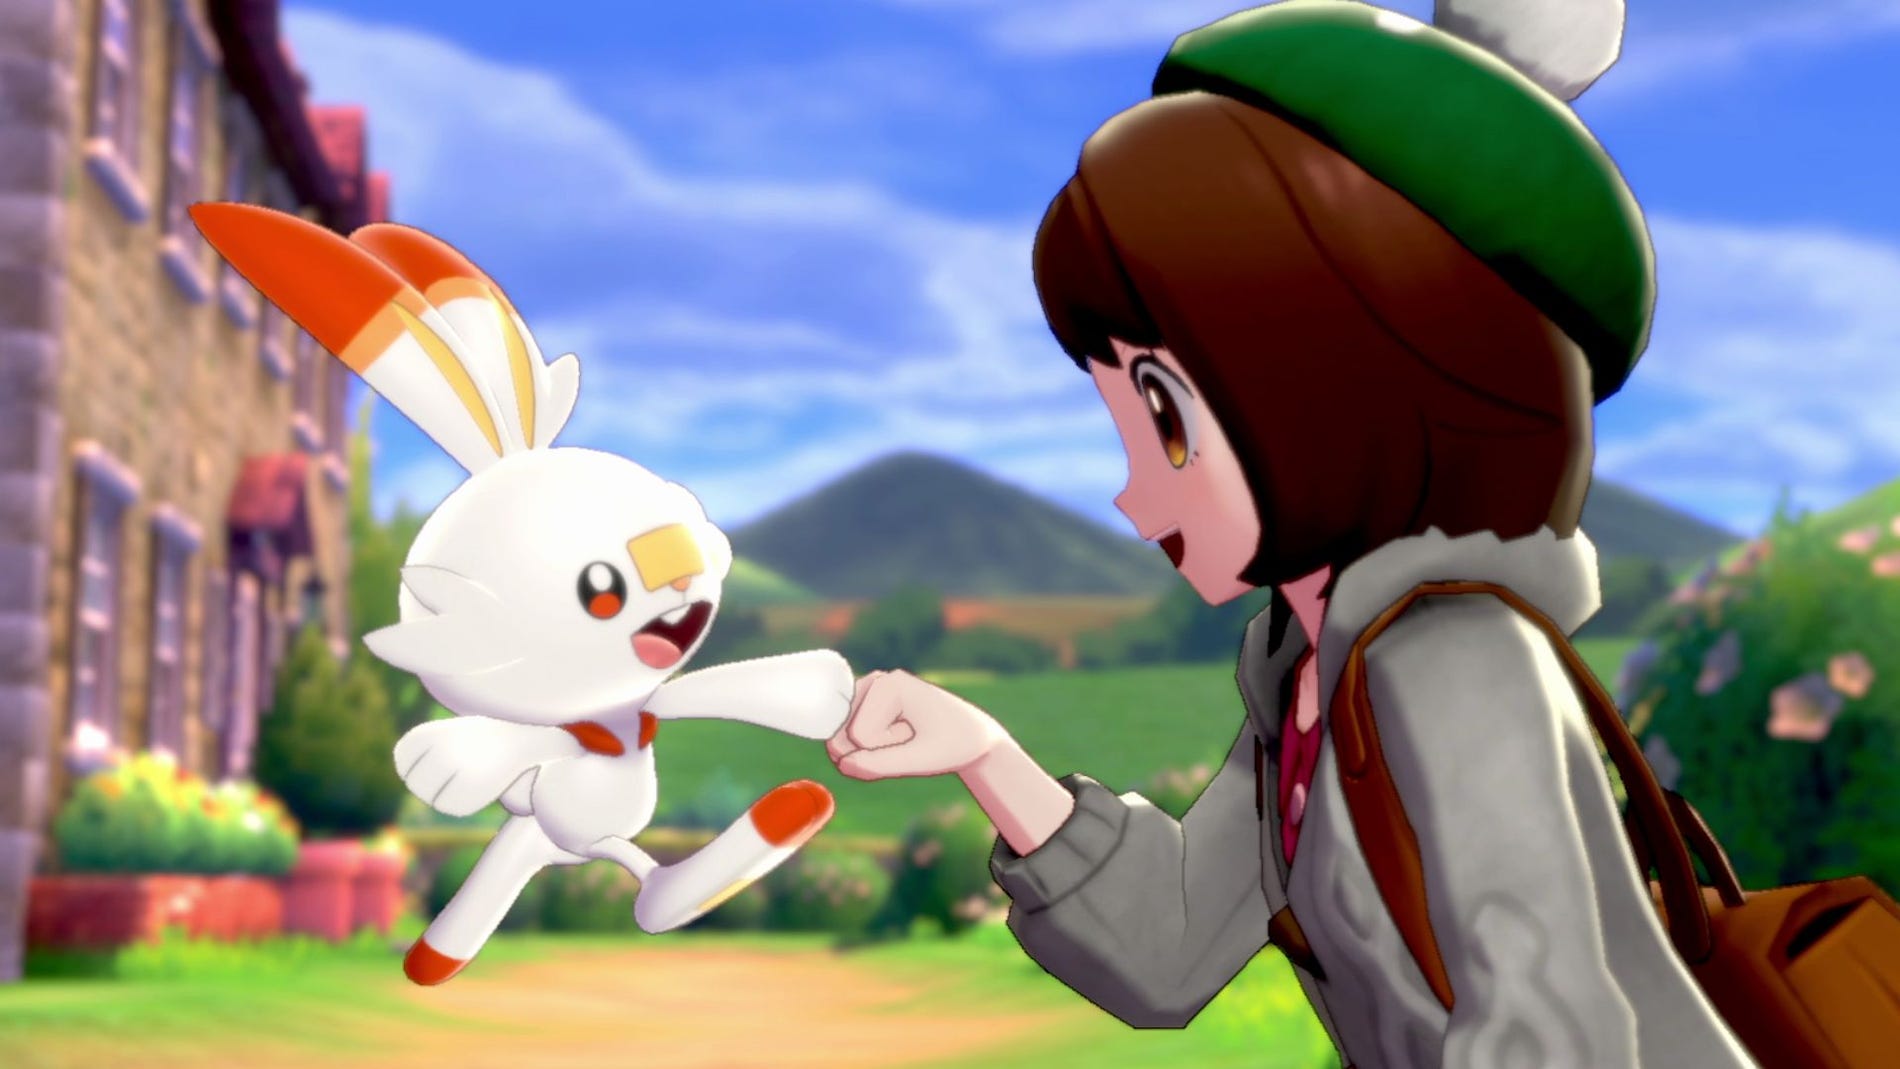 Pokémon Sword & Shield Are Most Successful Launch In Franchise, In Spite Of Controversy